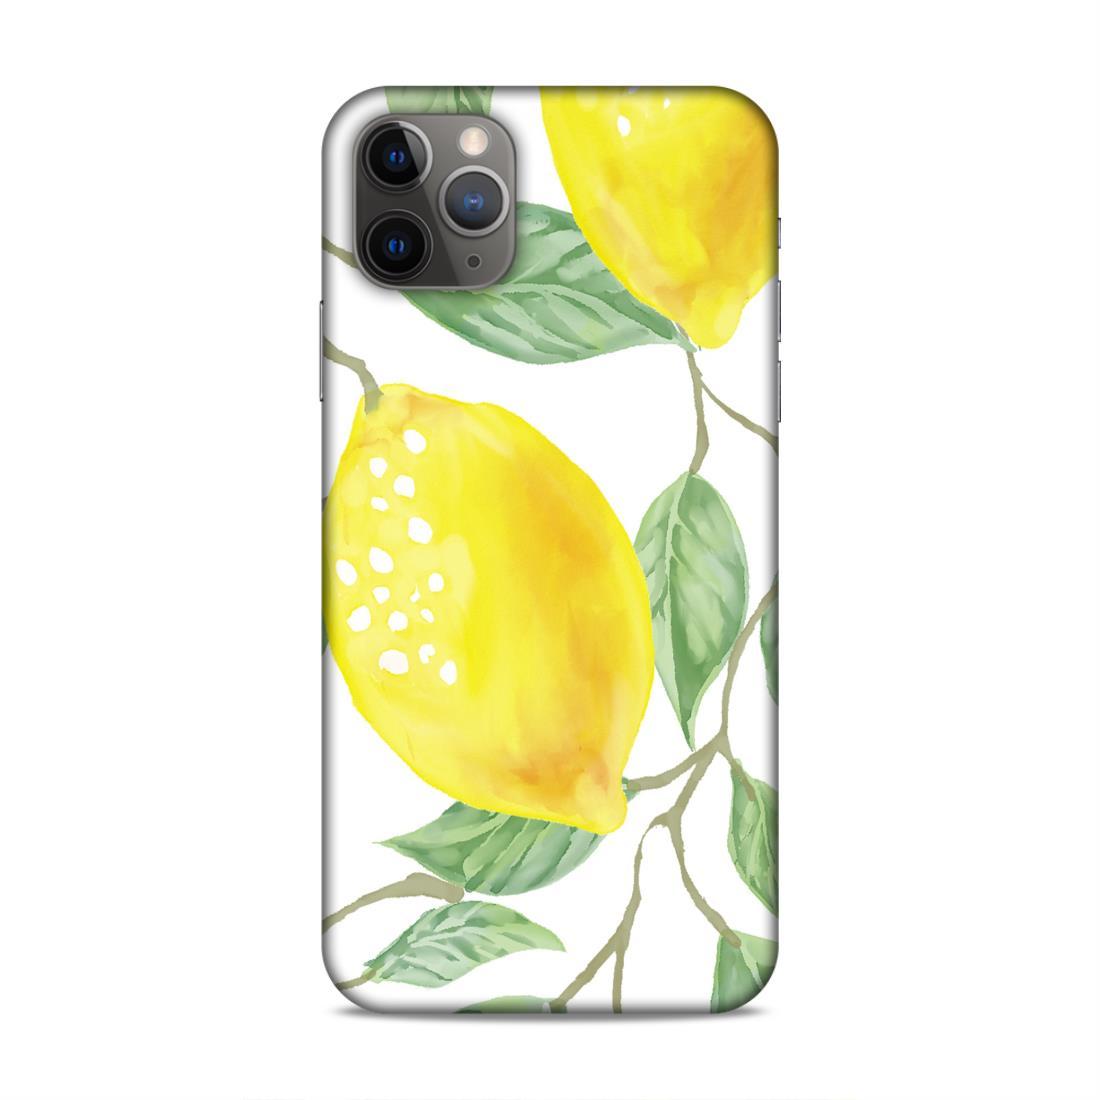 Mango Waterpainting iPhone 11 Pro Max Mobile Back Case